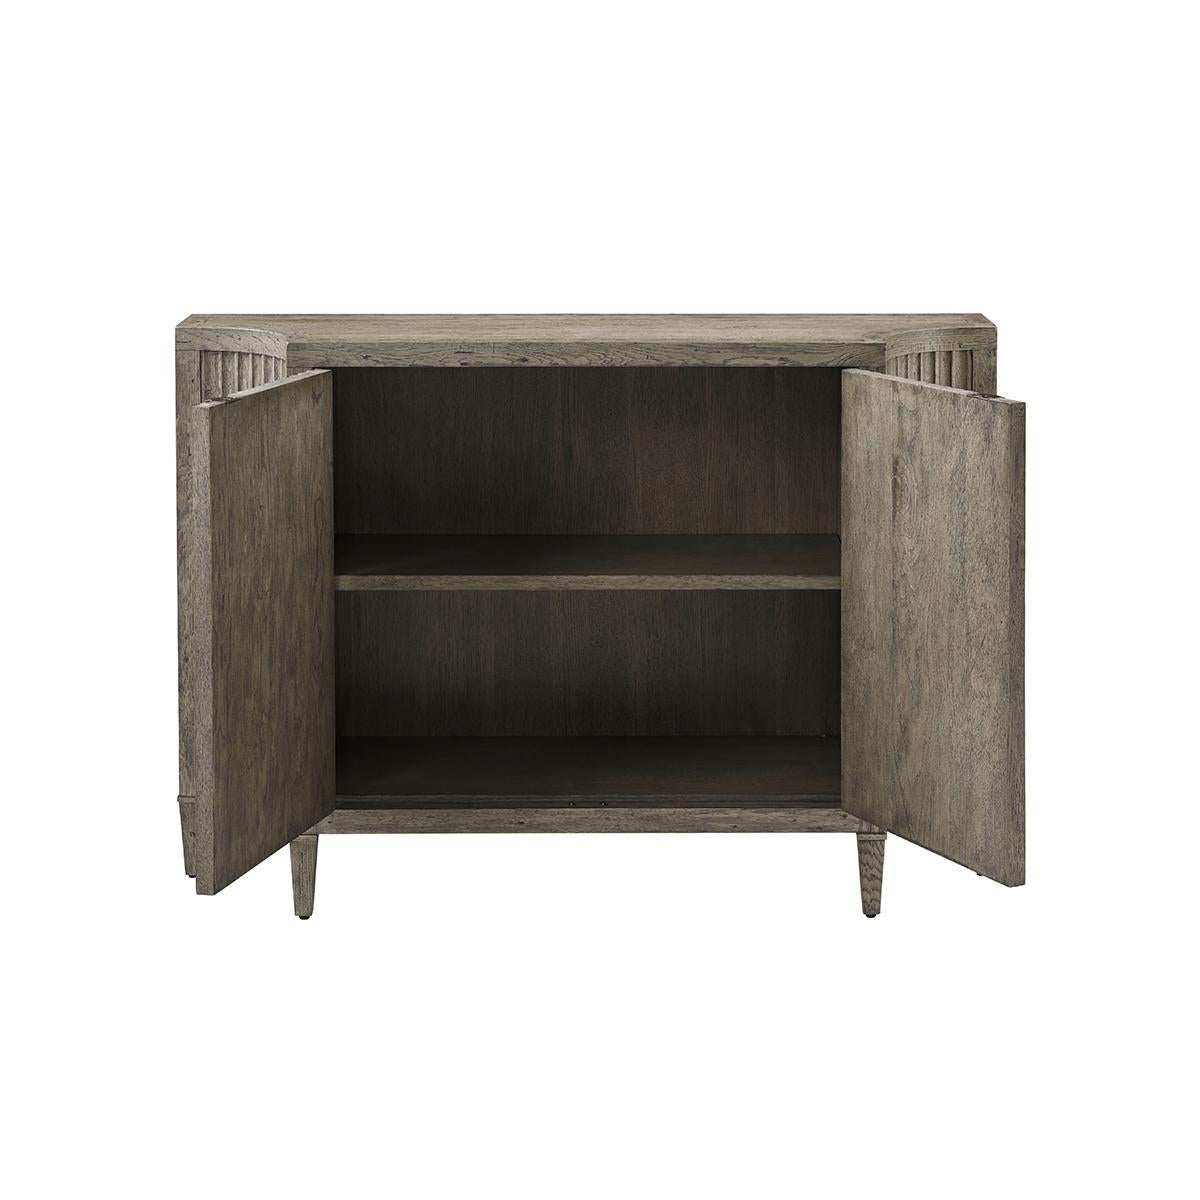 A modern rustic oak credenza taking form from French antiques of the 18th century. With walnut fluted doors, flanked by incurved ends, with a shaped top with parquetry inlaid decorations. The two-door cabinet opens to an interior, ideal for storage,